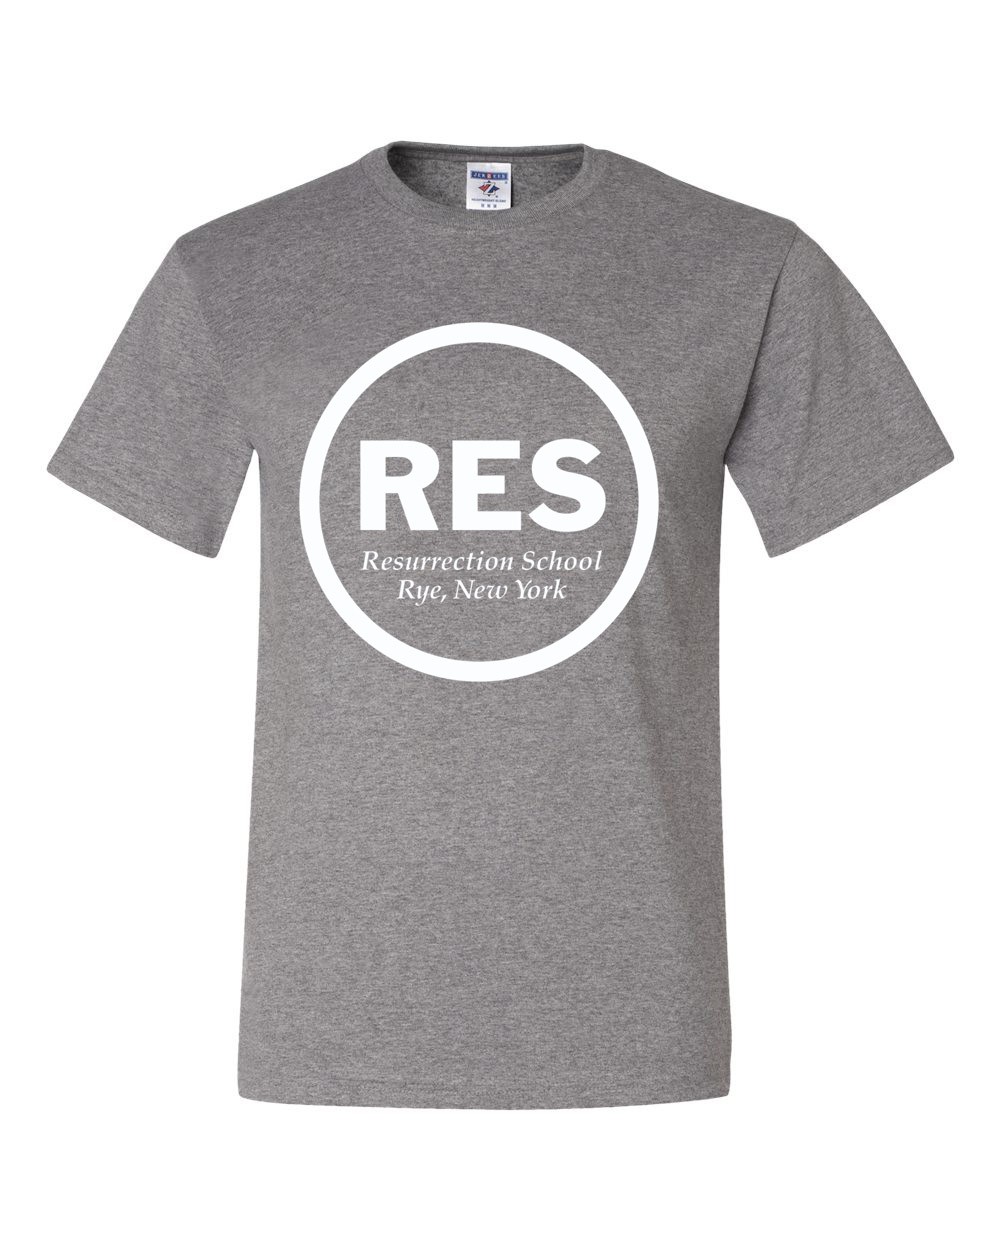 STAFF Resurrection S/S T-Shirt w/ White Logo - Please Allow 2-3 Weeks for Delivery